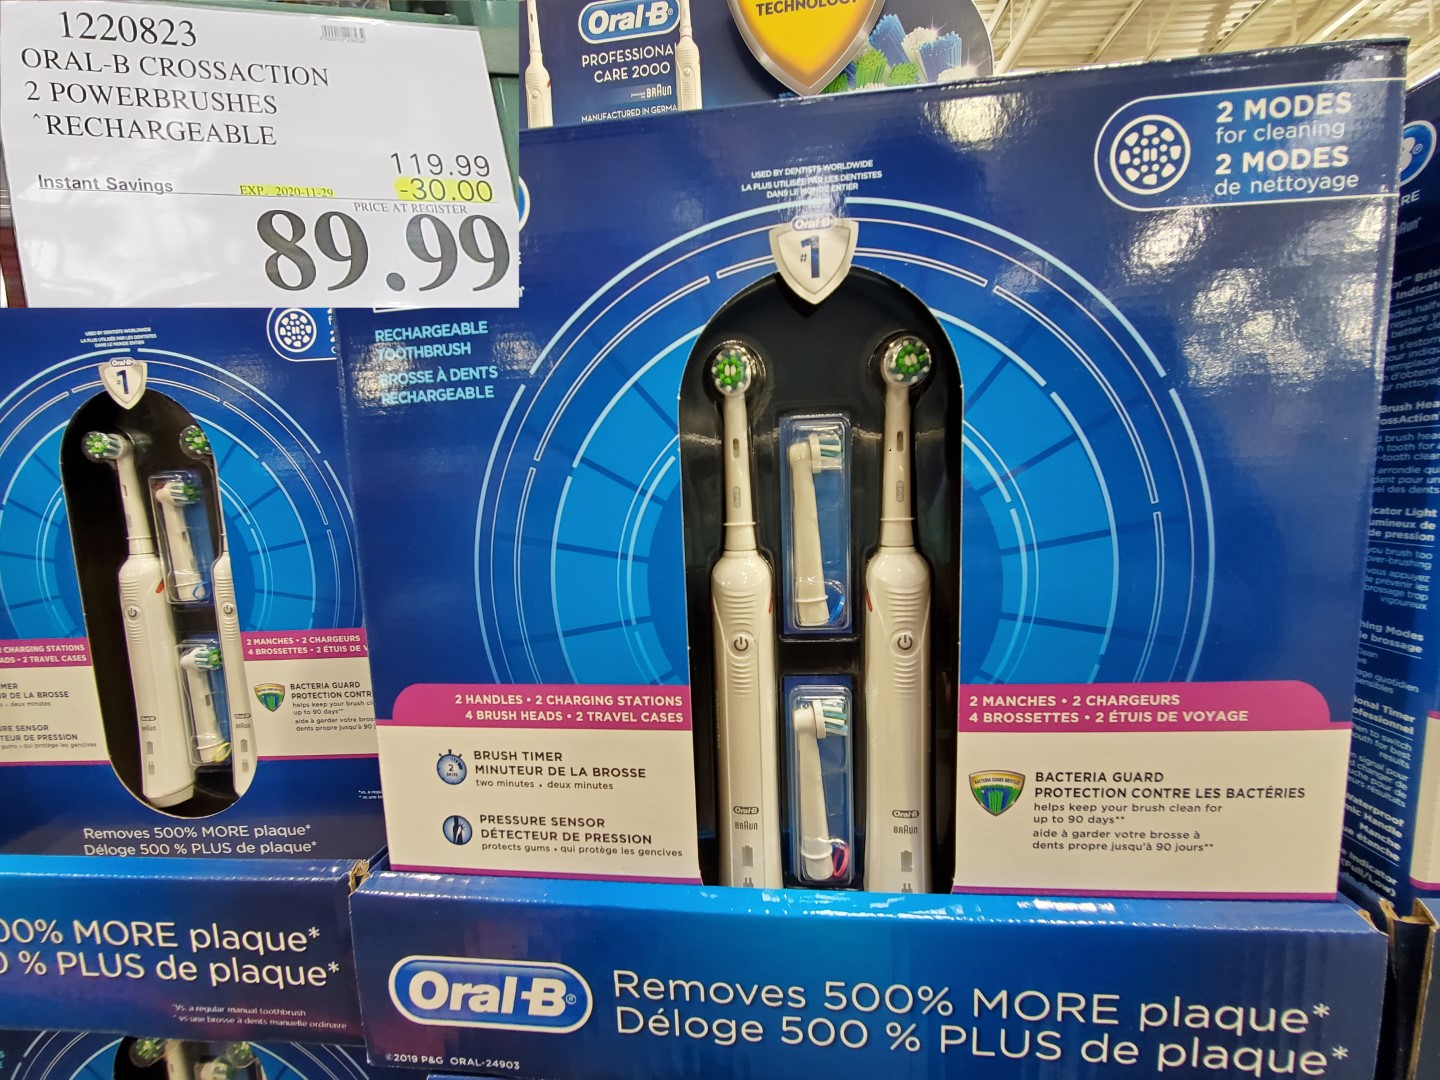 oral-B electric toothbrushes